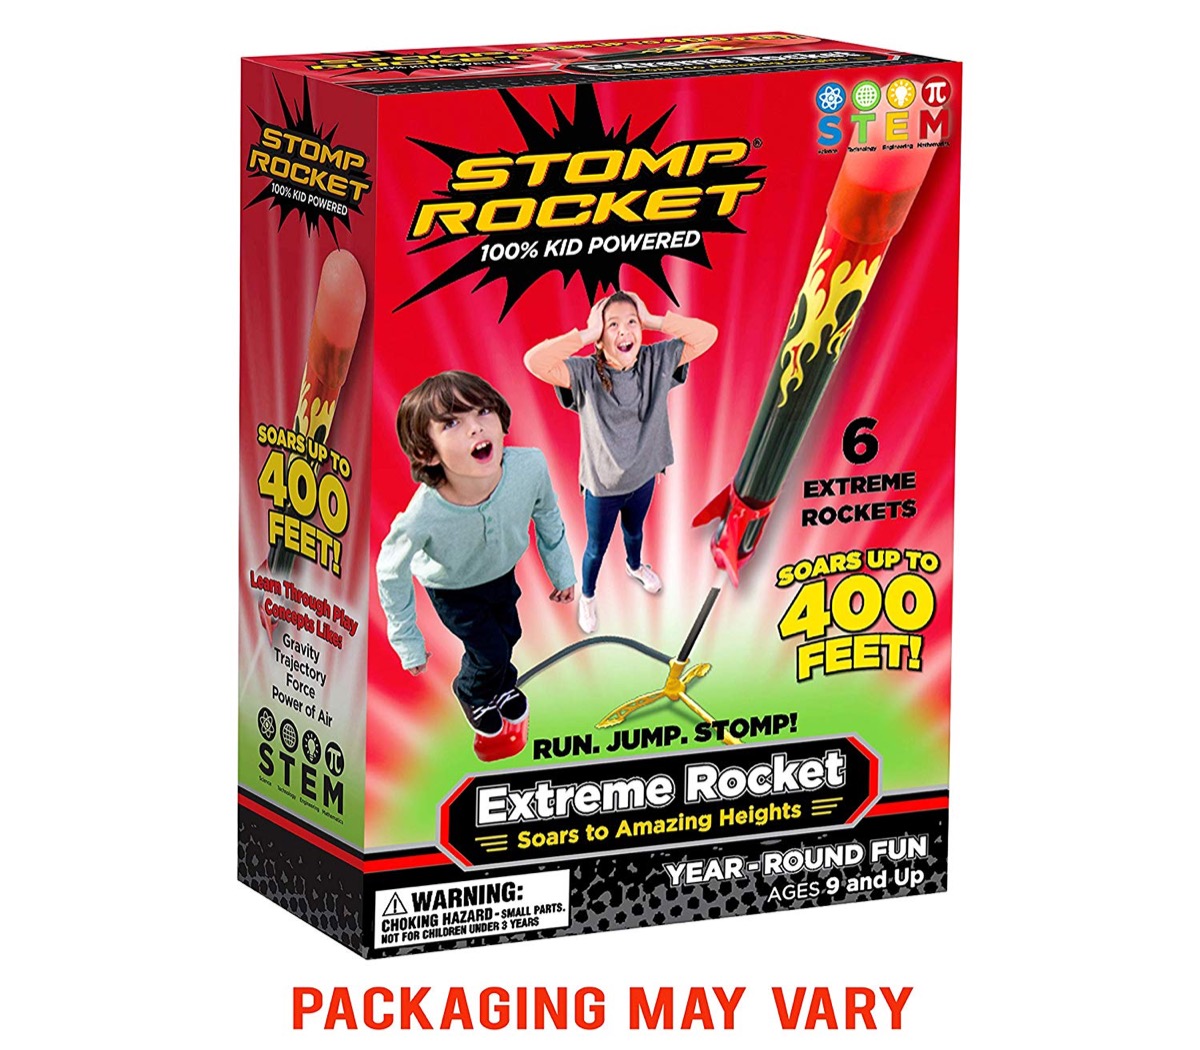 box with toy rocket in it